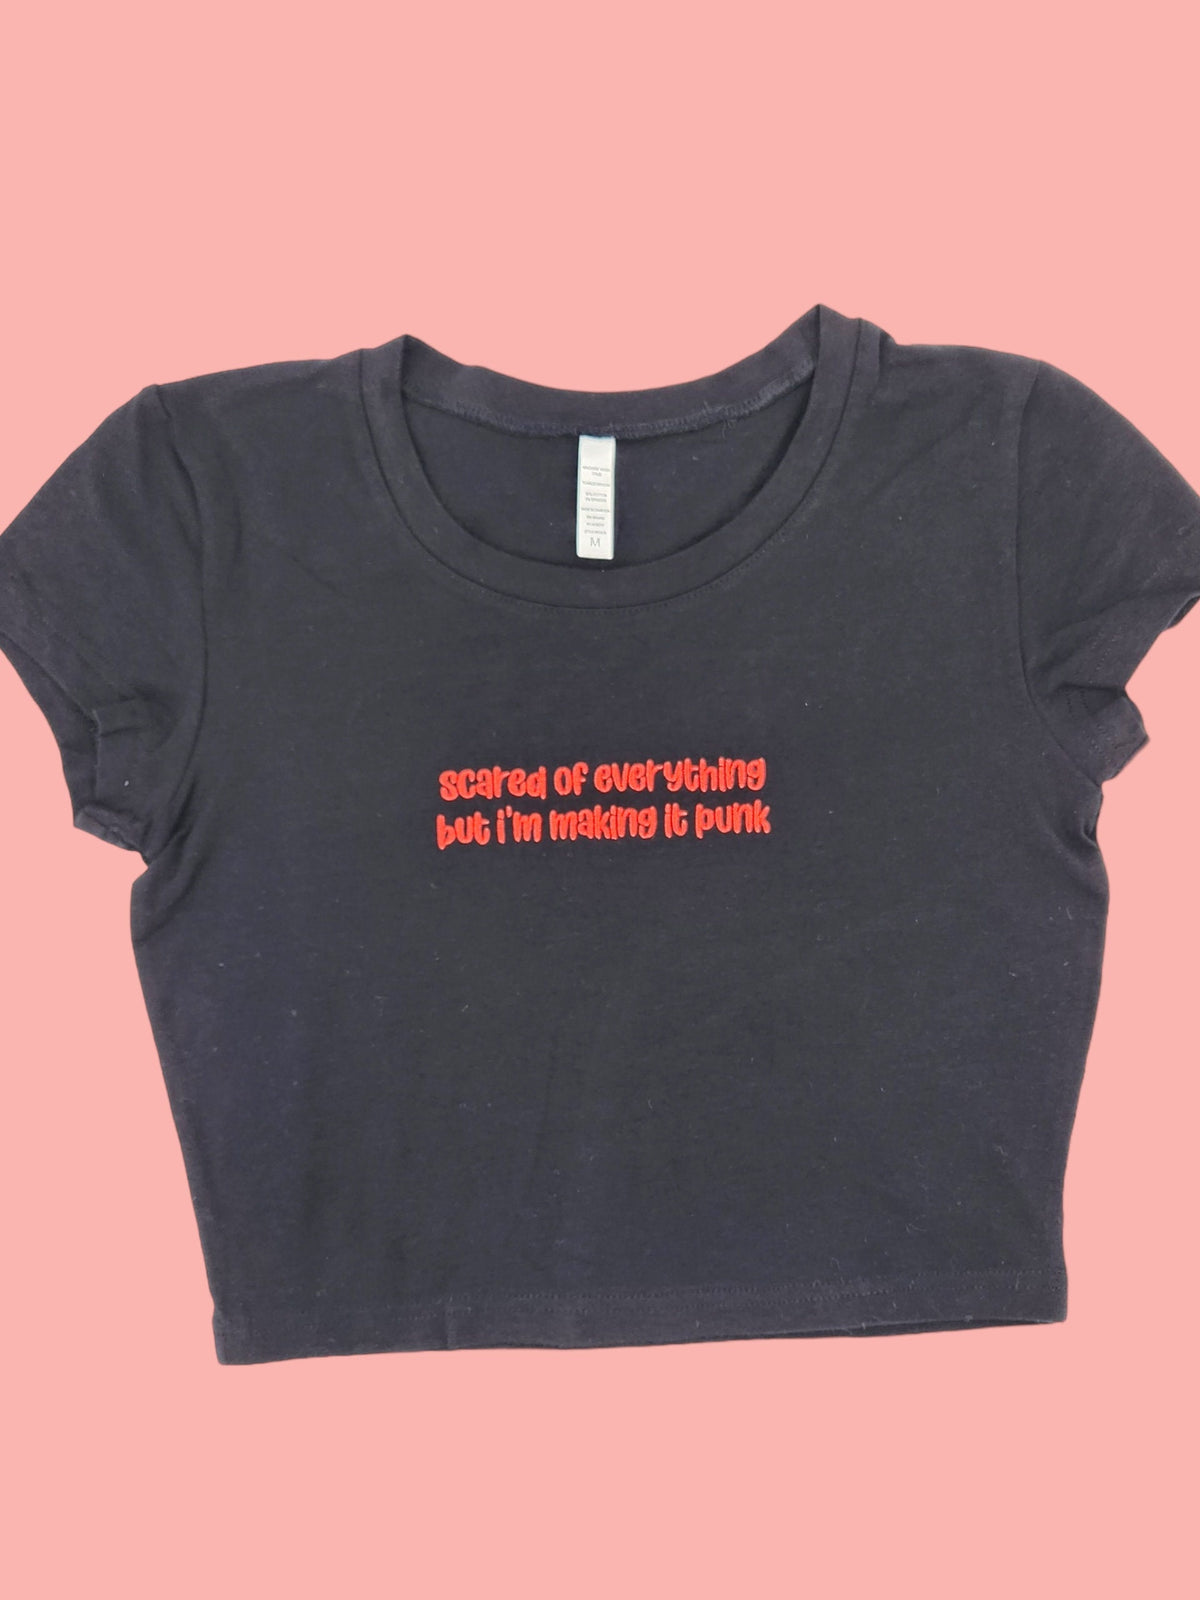 a black t - shirt with a message on it